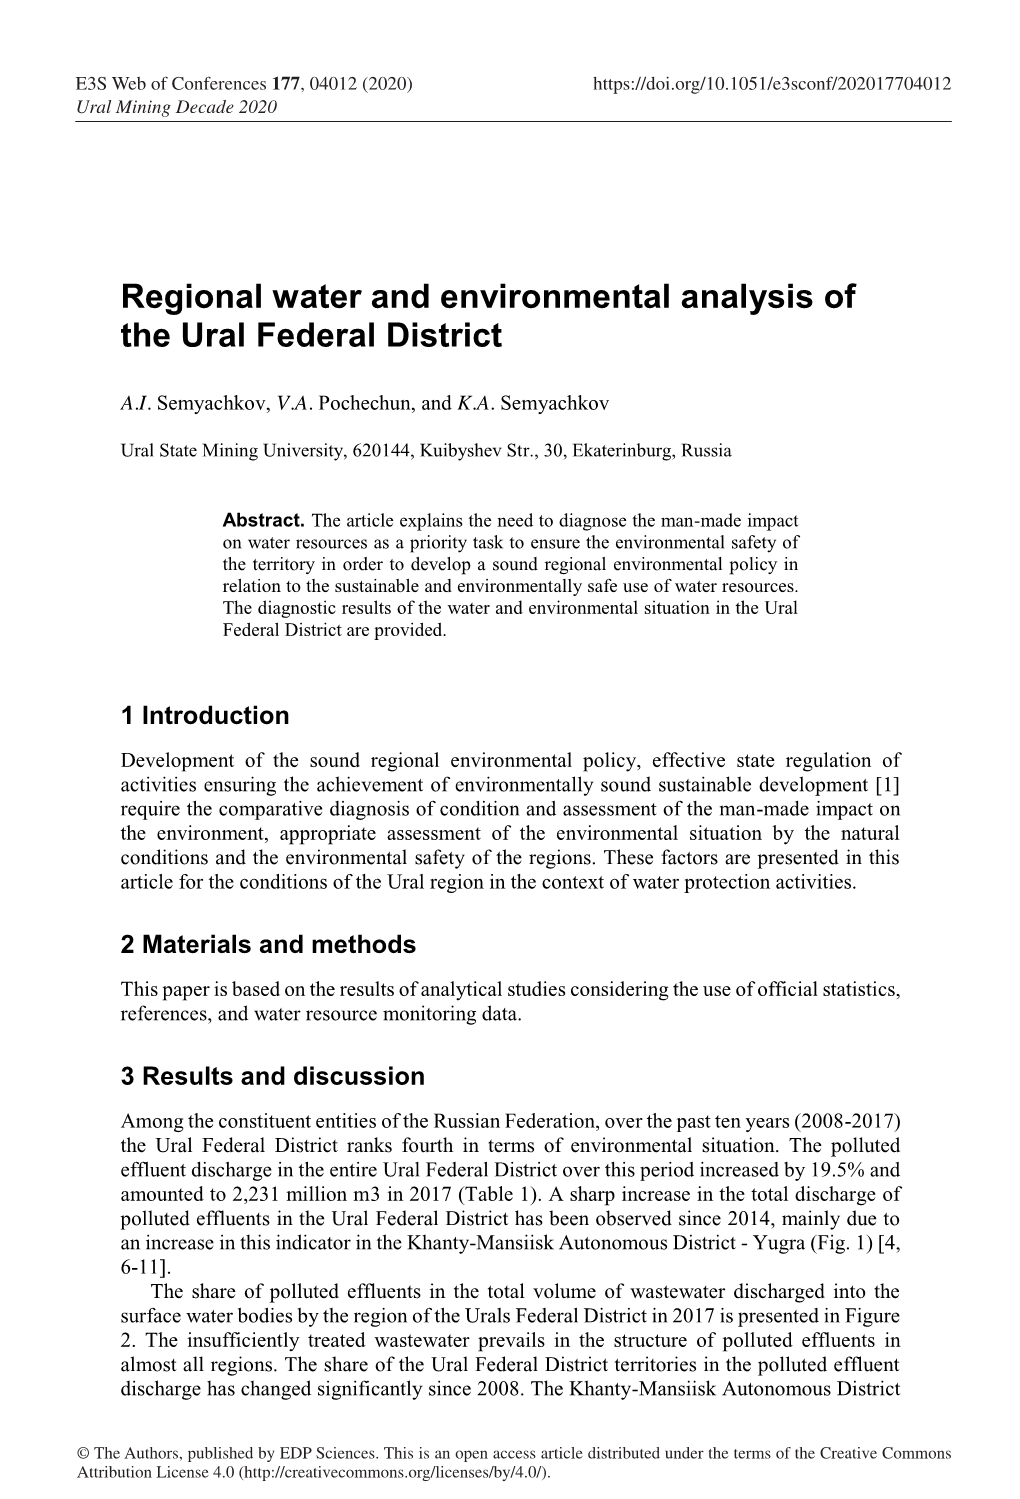 Regional Water and Environmental Analysis of the Ural Federal District